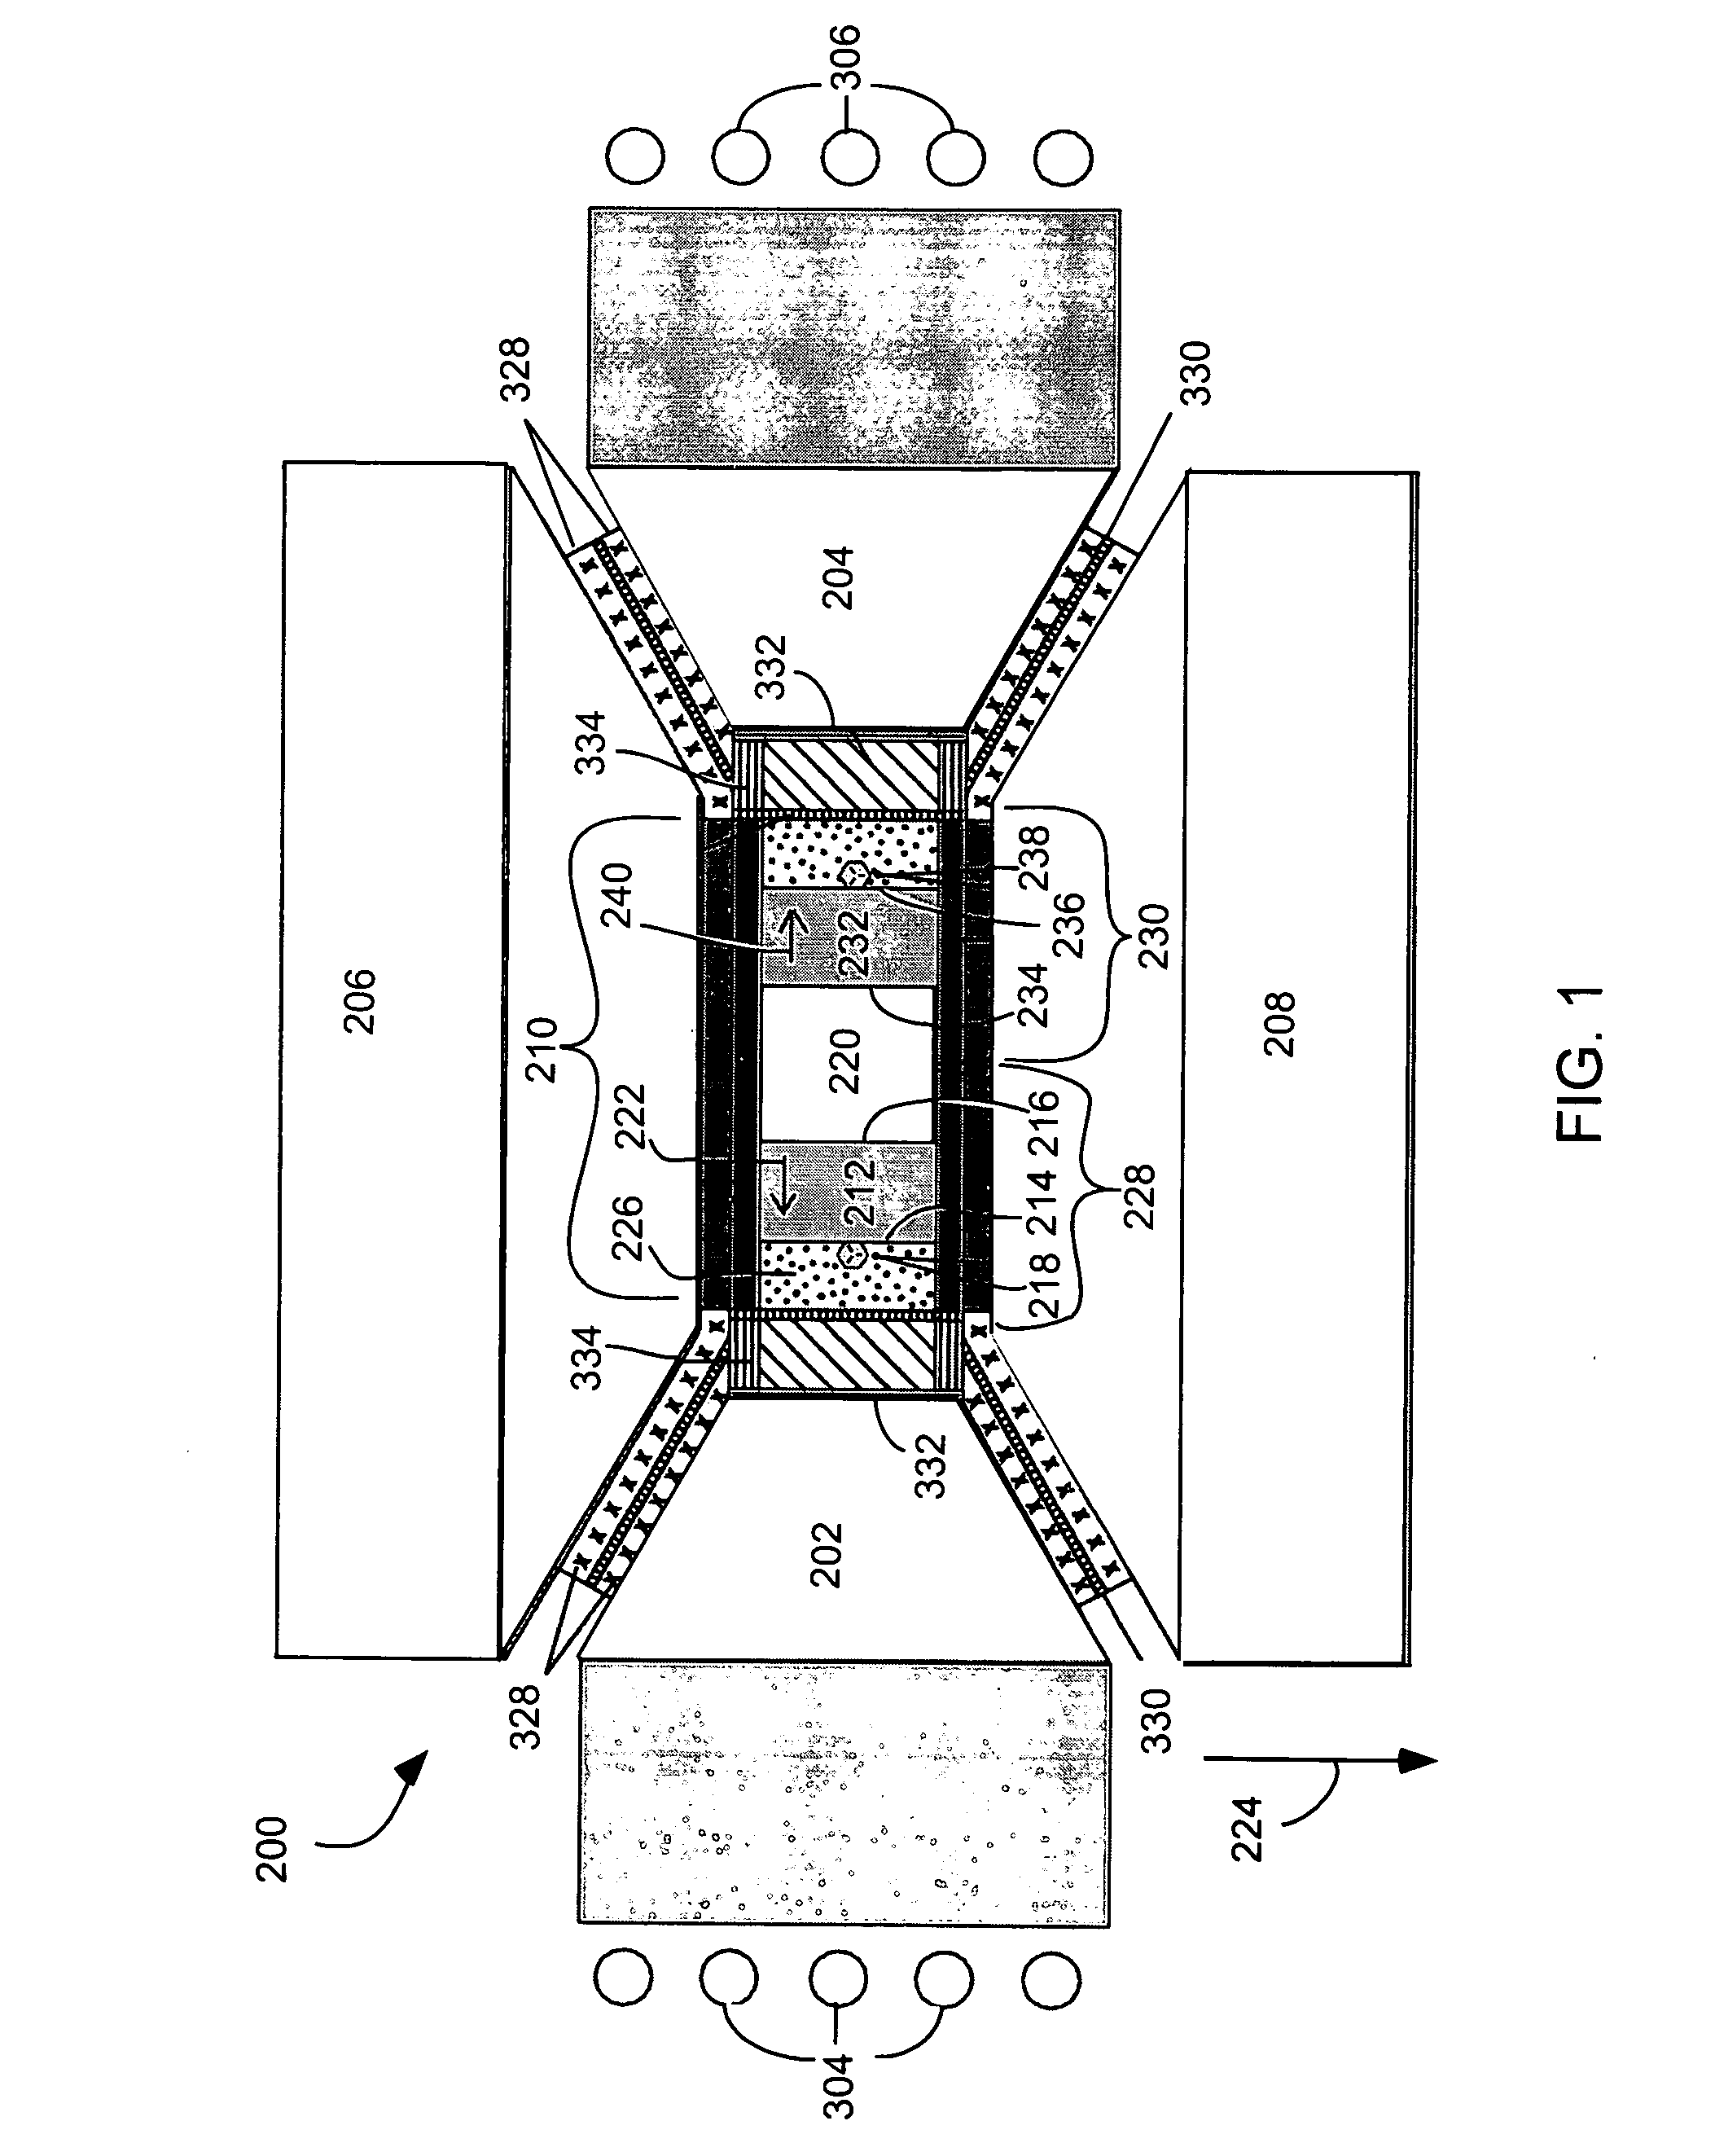 High pressure crystal growth apparatuses and associated methods